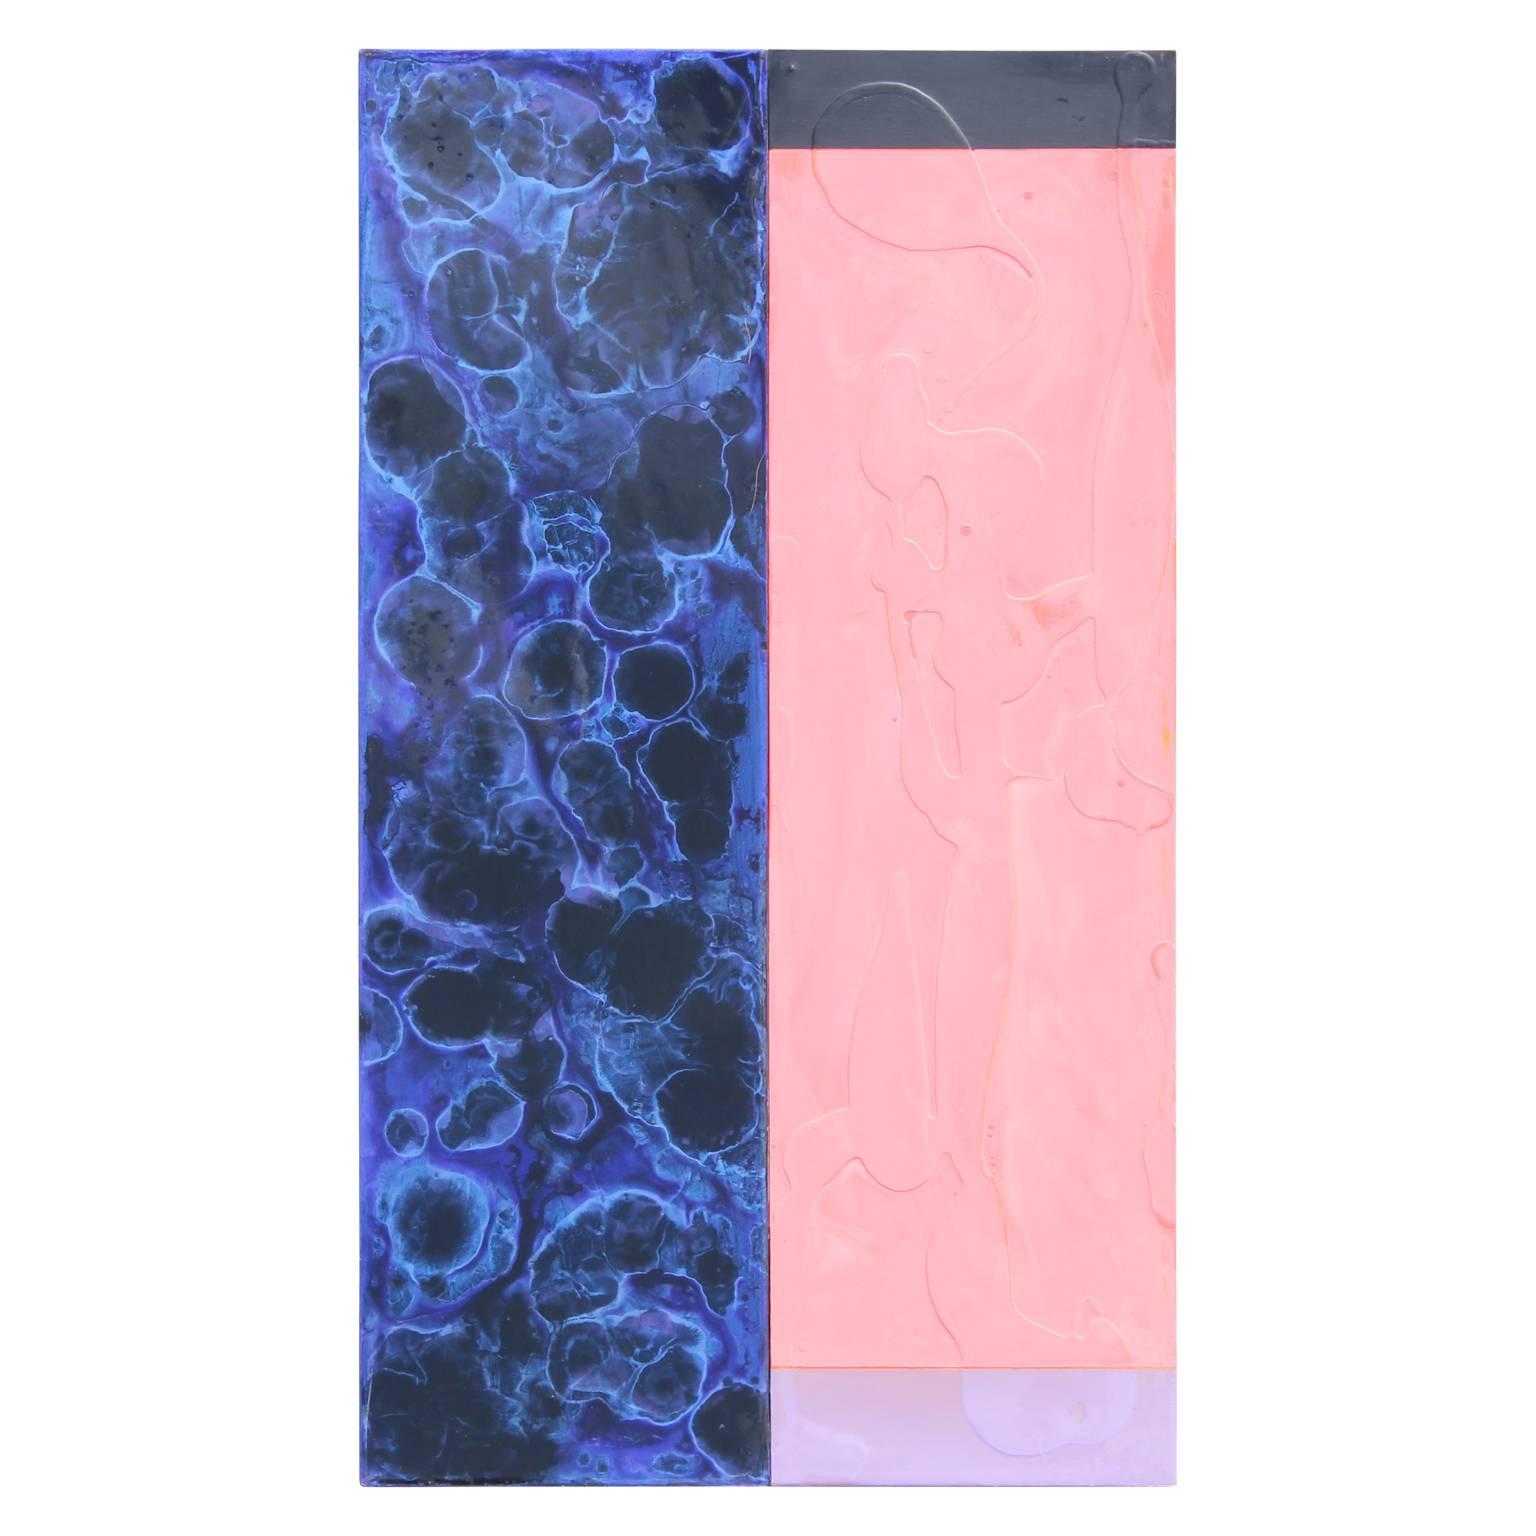 Minimal Contemporary Pink and Blue Abstract Painting - Mixed Media Art by Michael Hollis